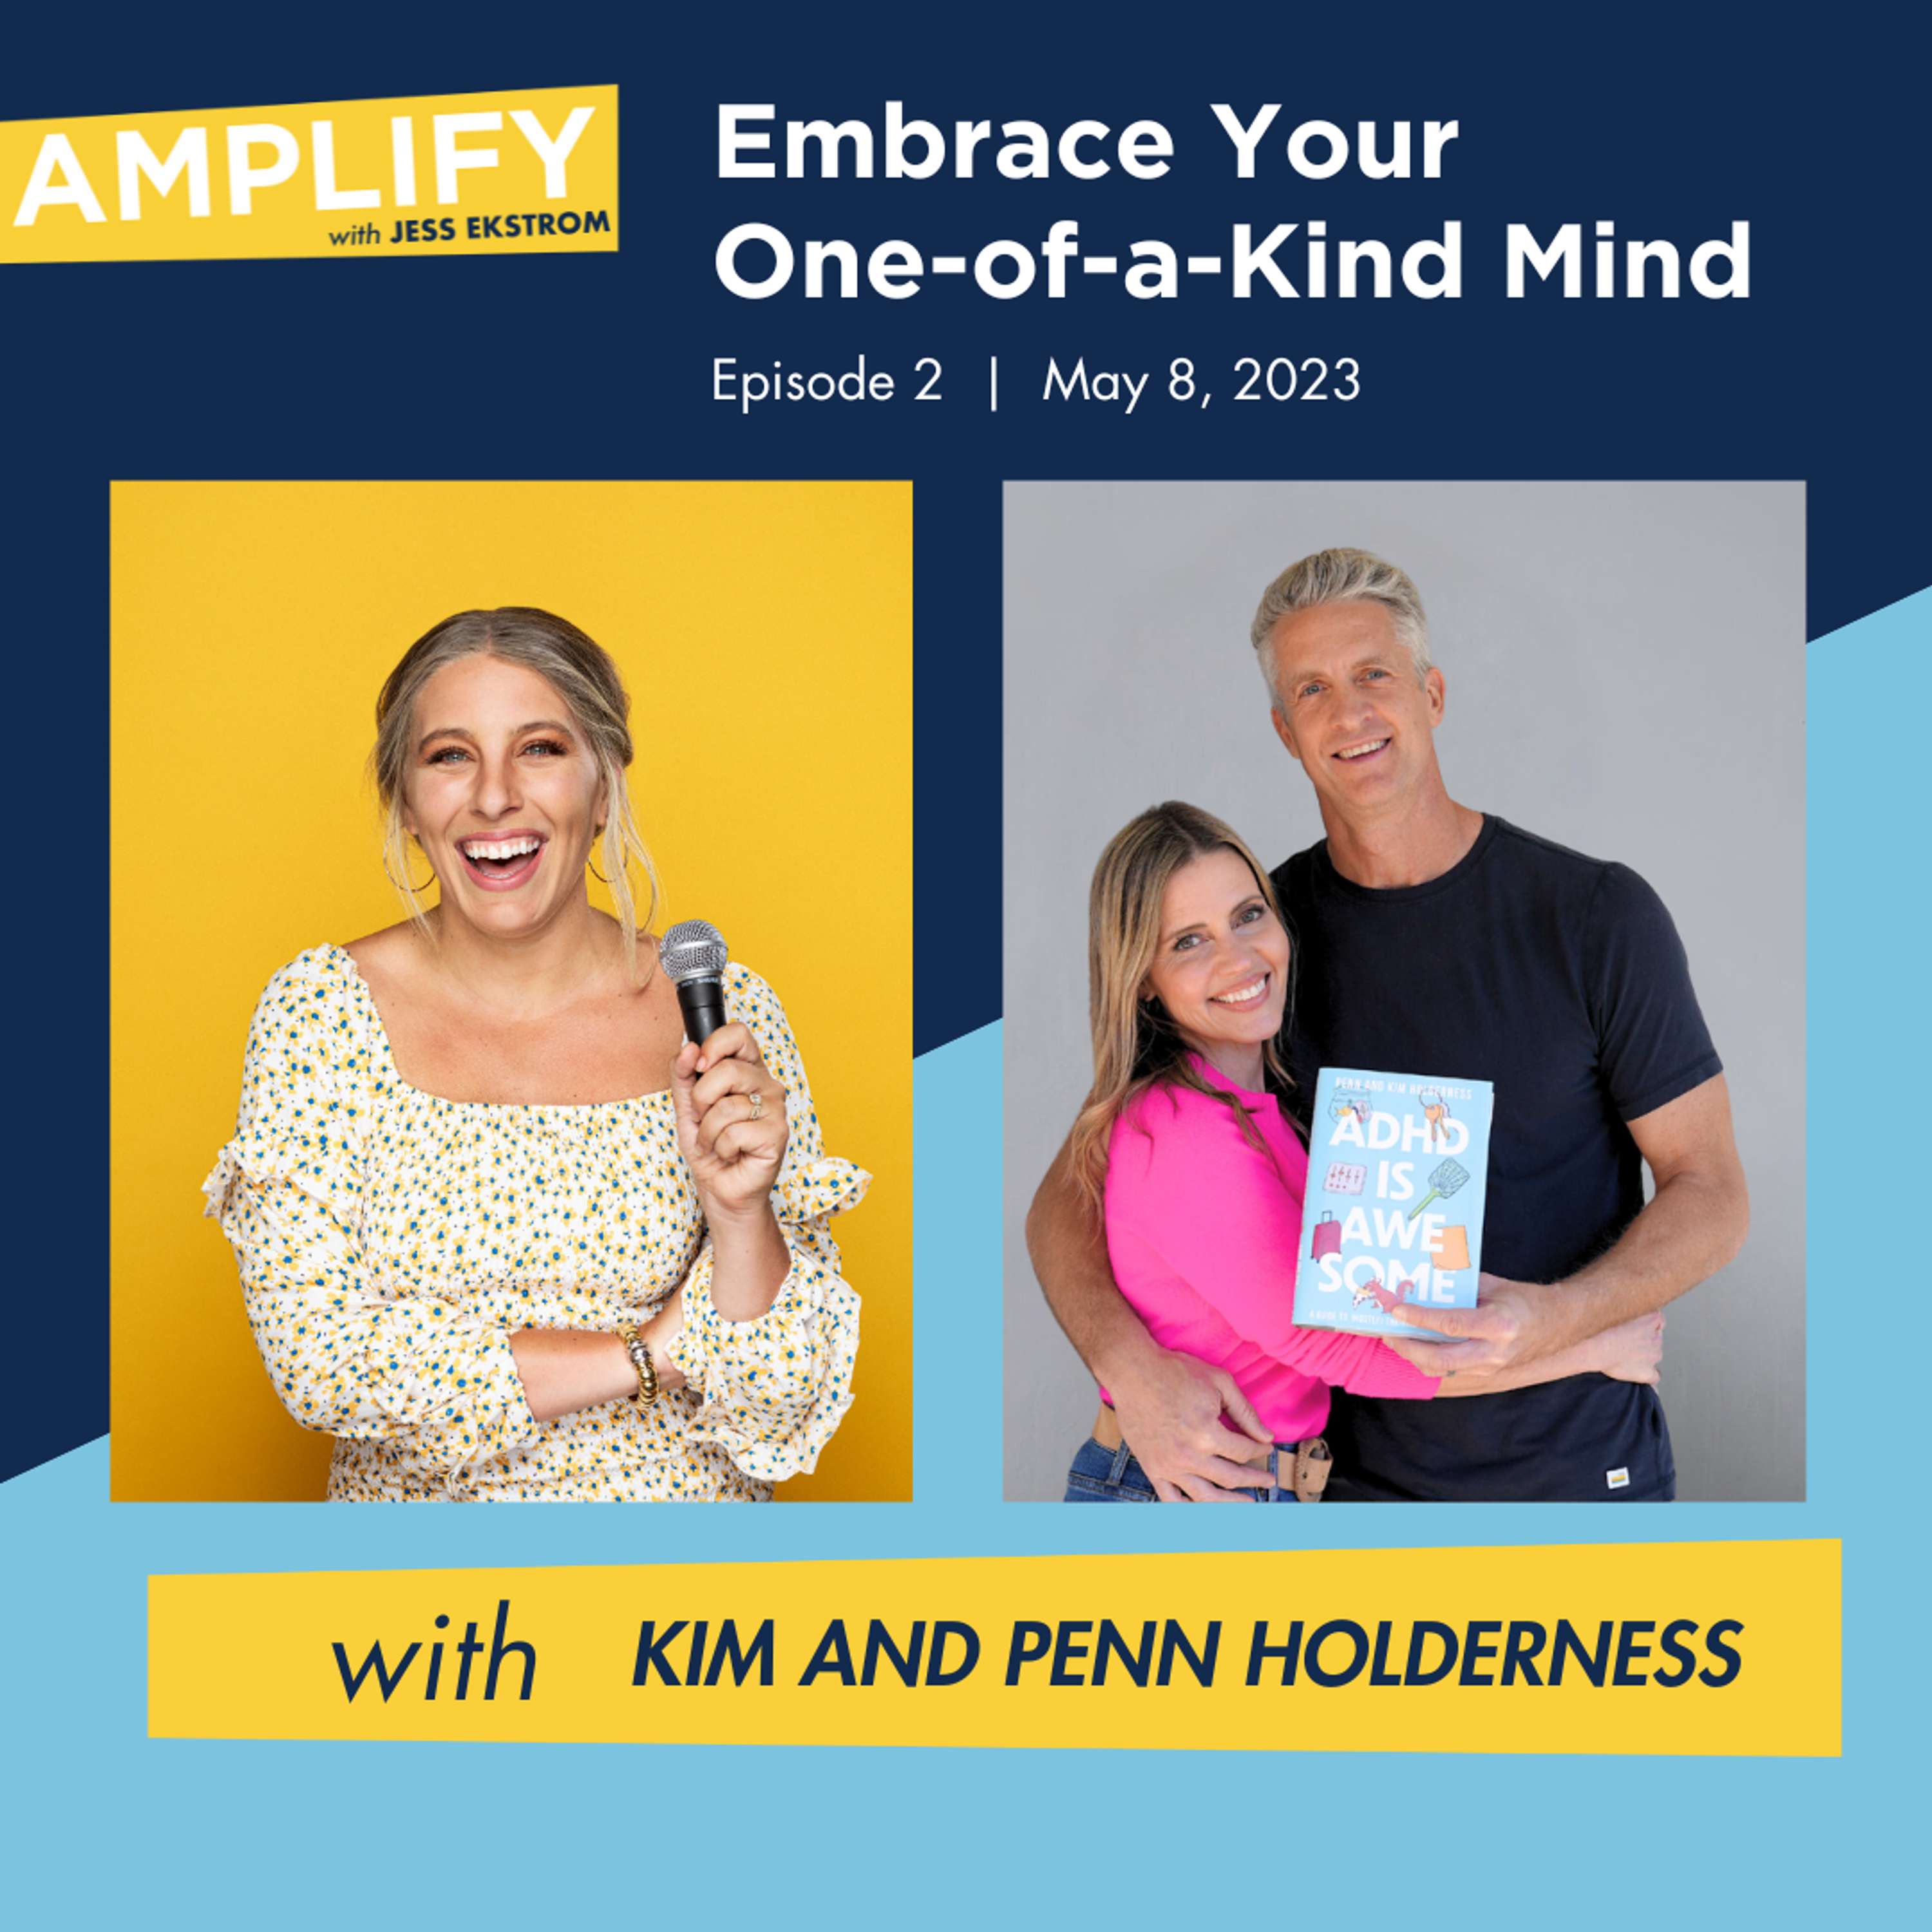 Embrace Your One-of-a-Kind Mind with the Viral Kim and Penn Holderness